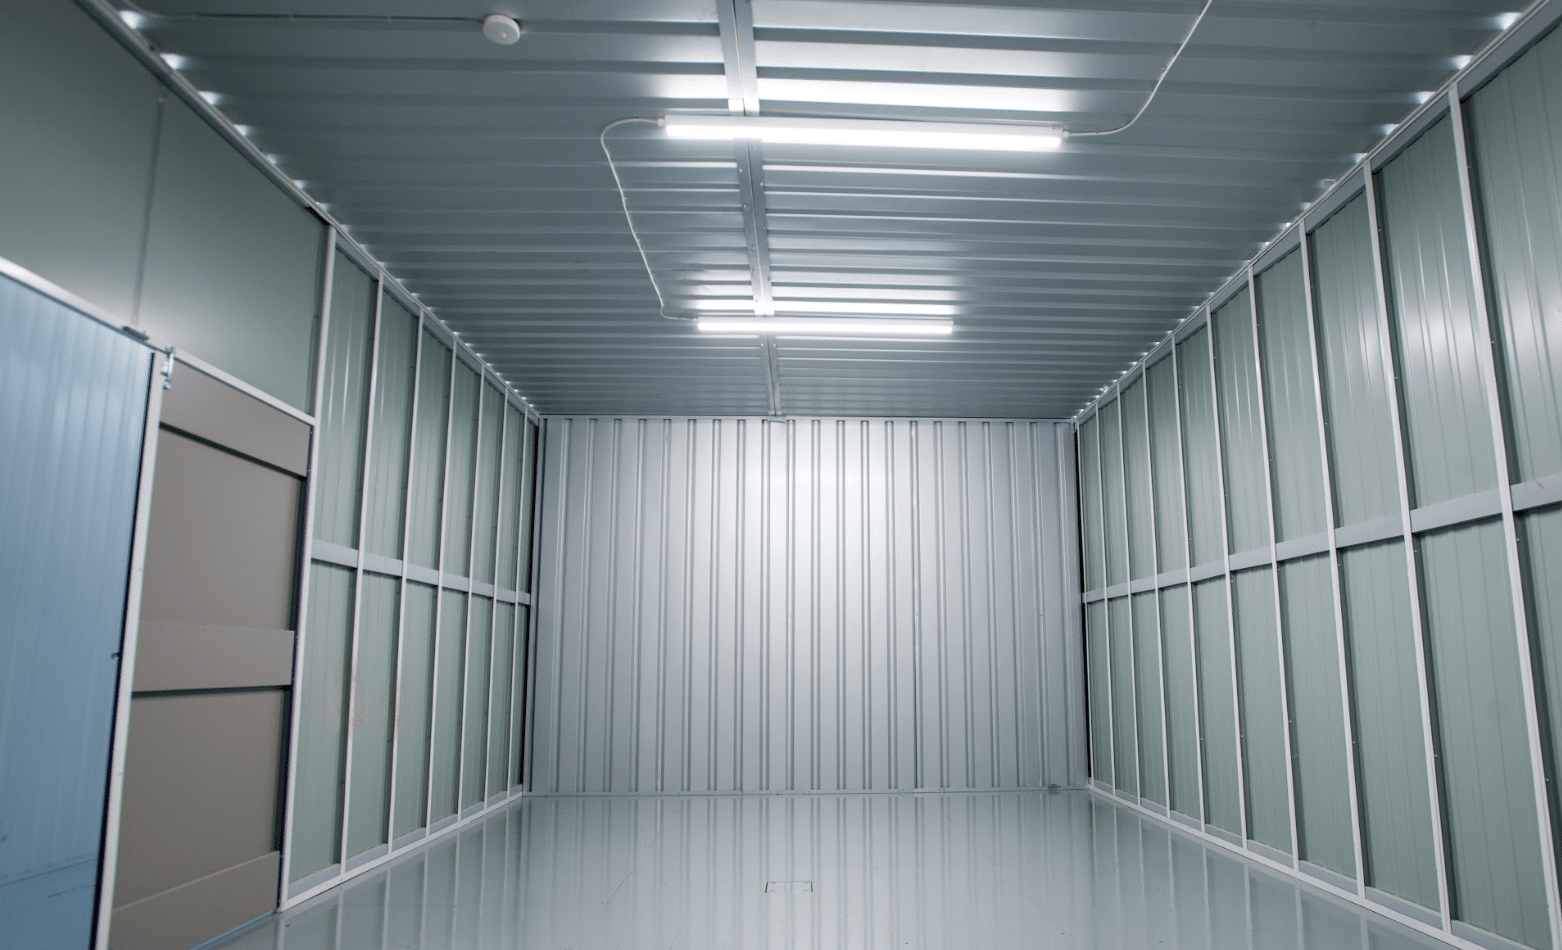 7 benefits of renting an industrial unit for your business. Image shows the inside of a large industrial unit with strip lighting on the ceiling.